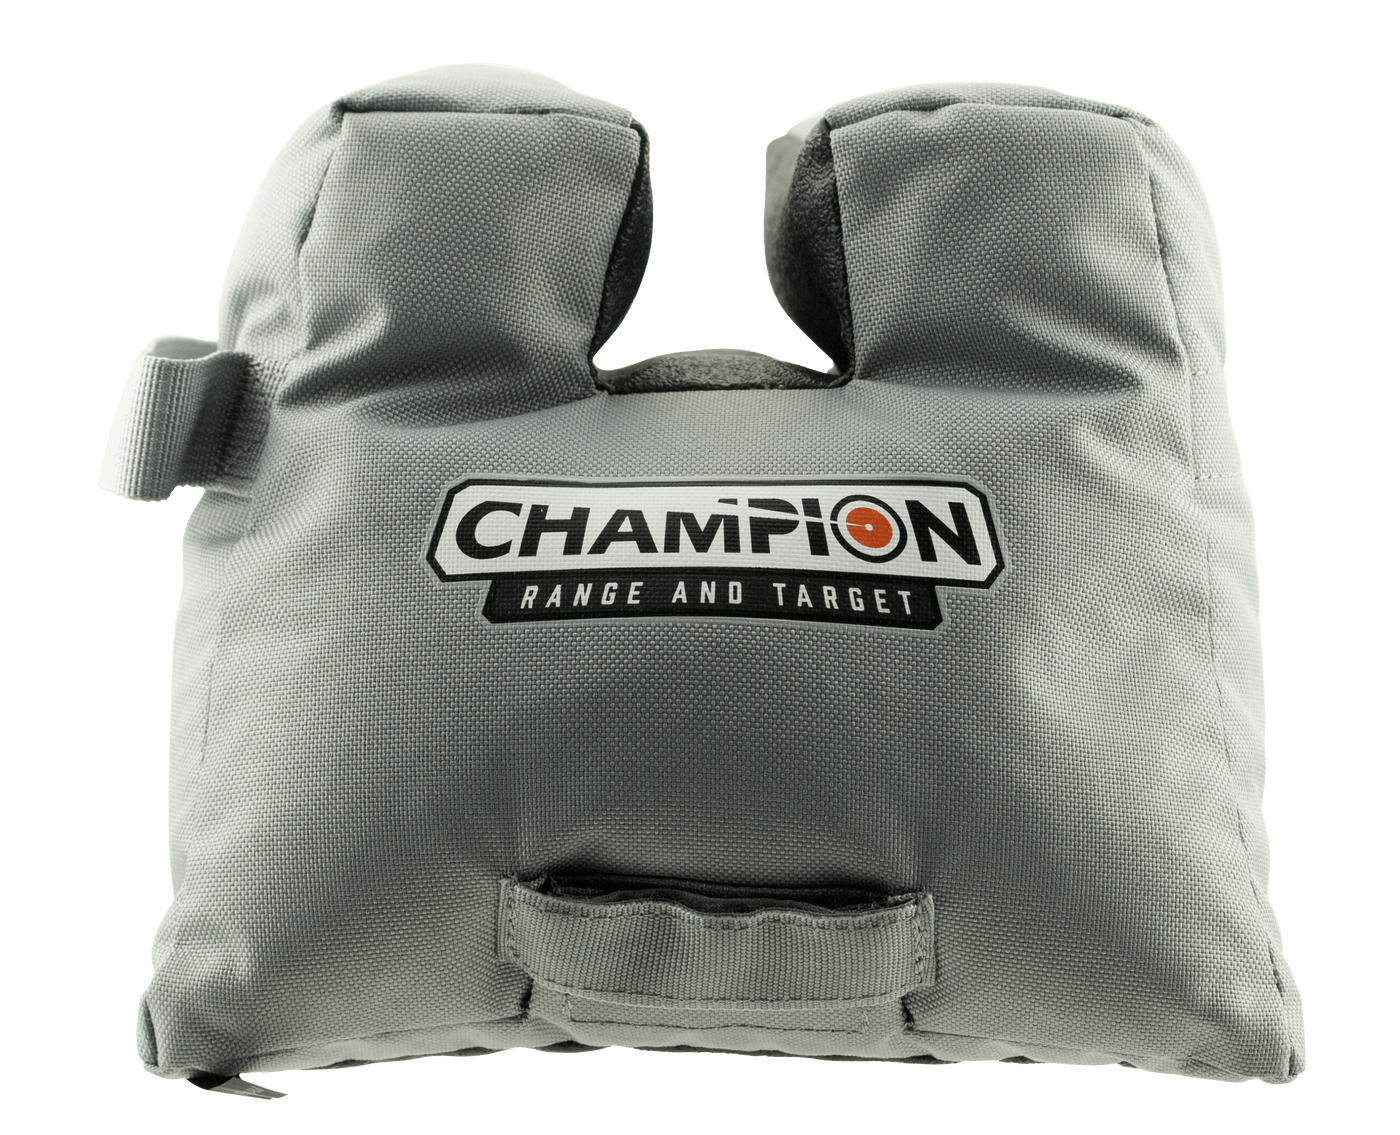 Champion Targets Champion Targets Shooting Bag, Champ 40893 Front V Bag Firearm Accessories